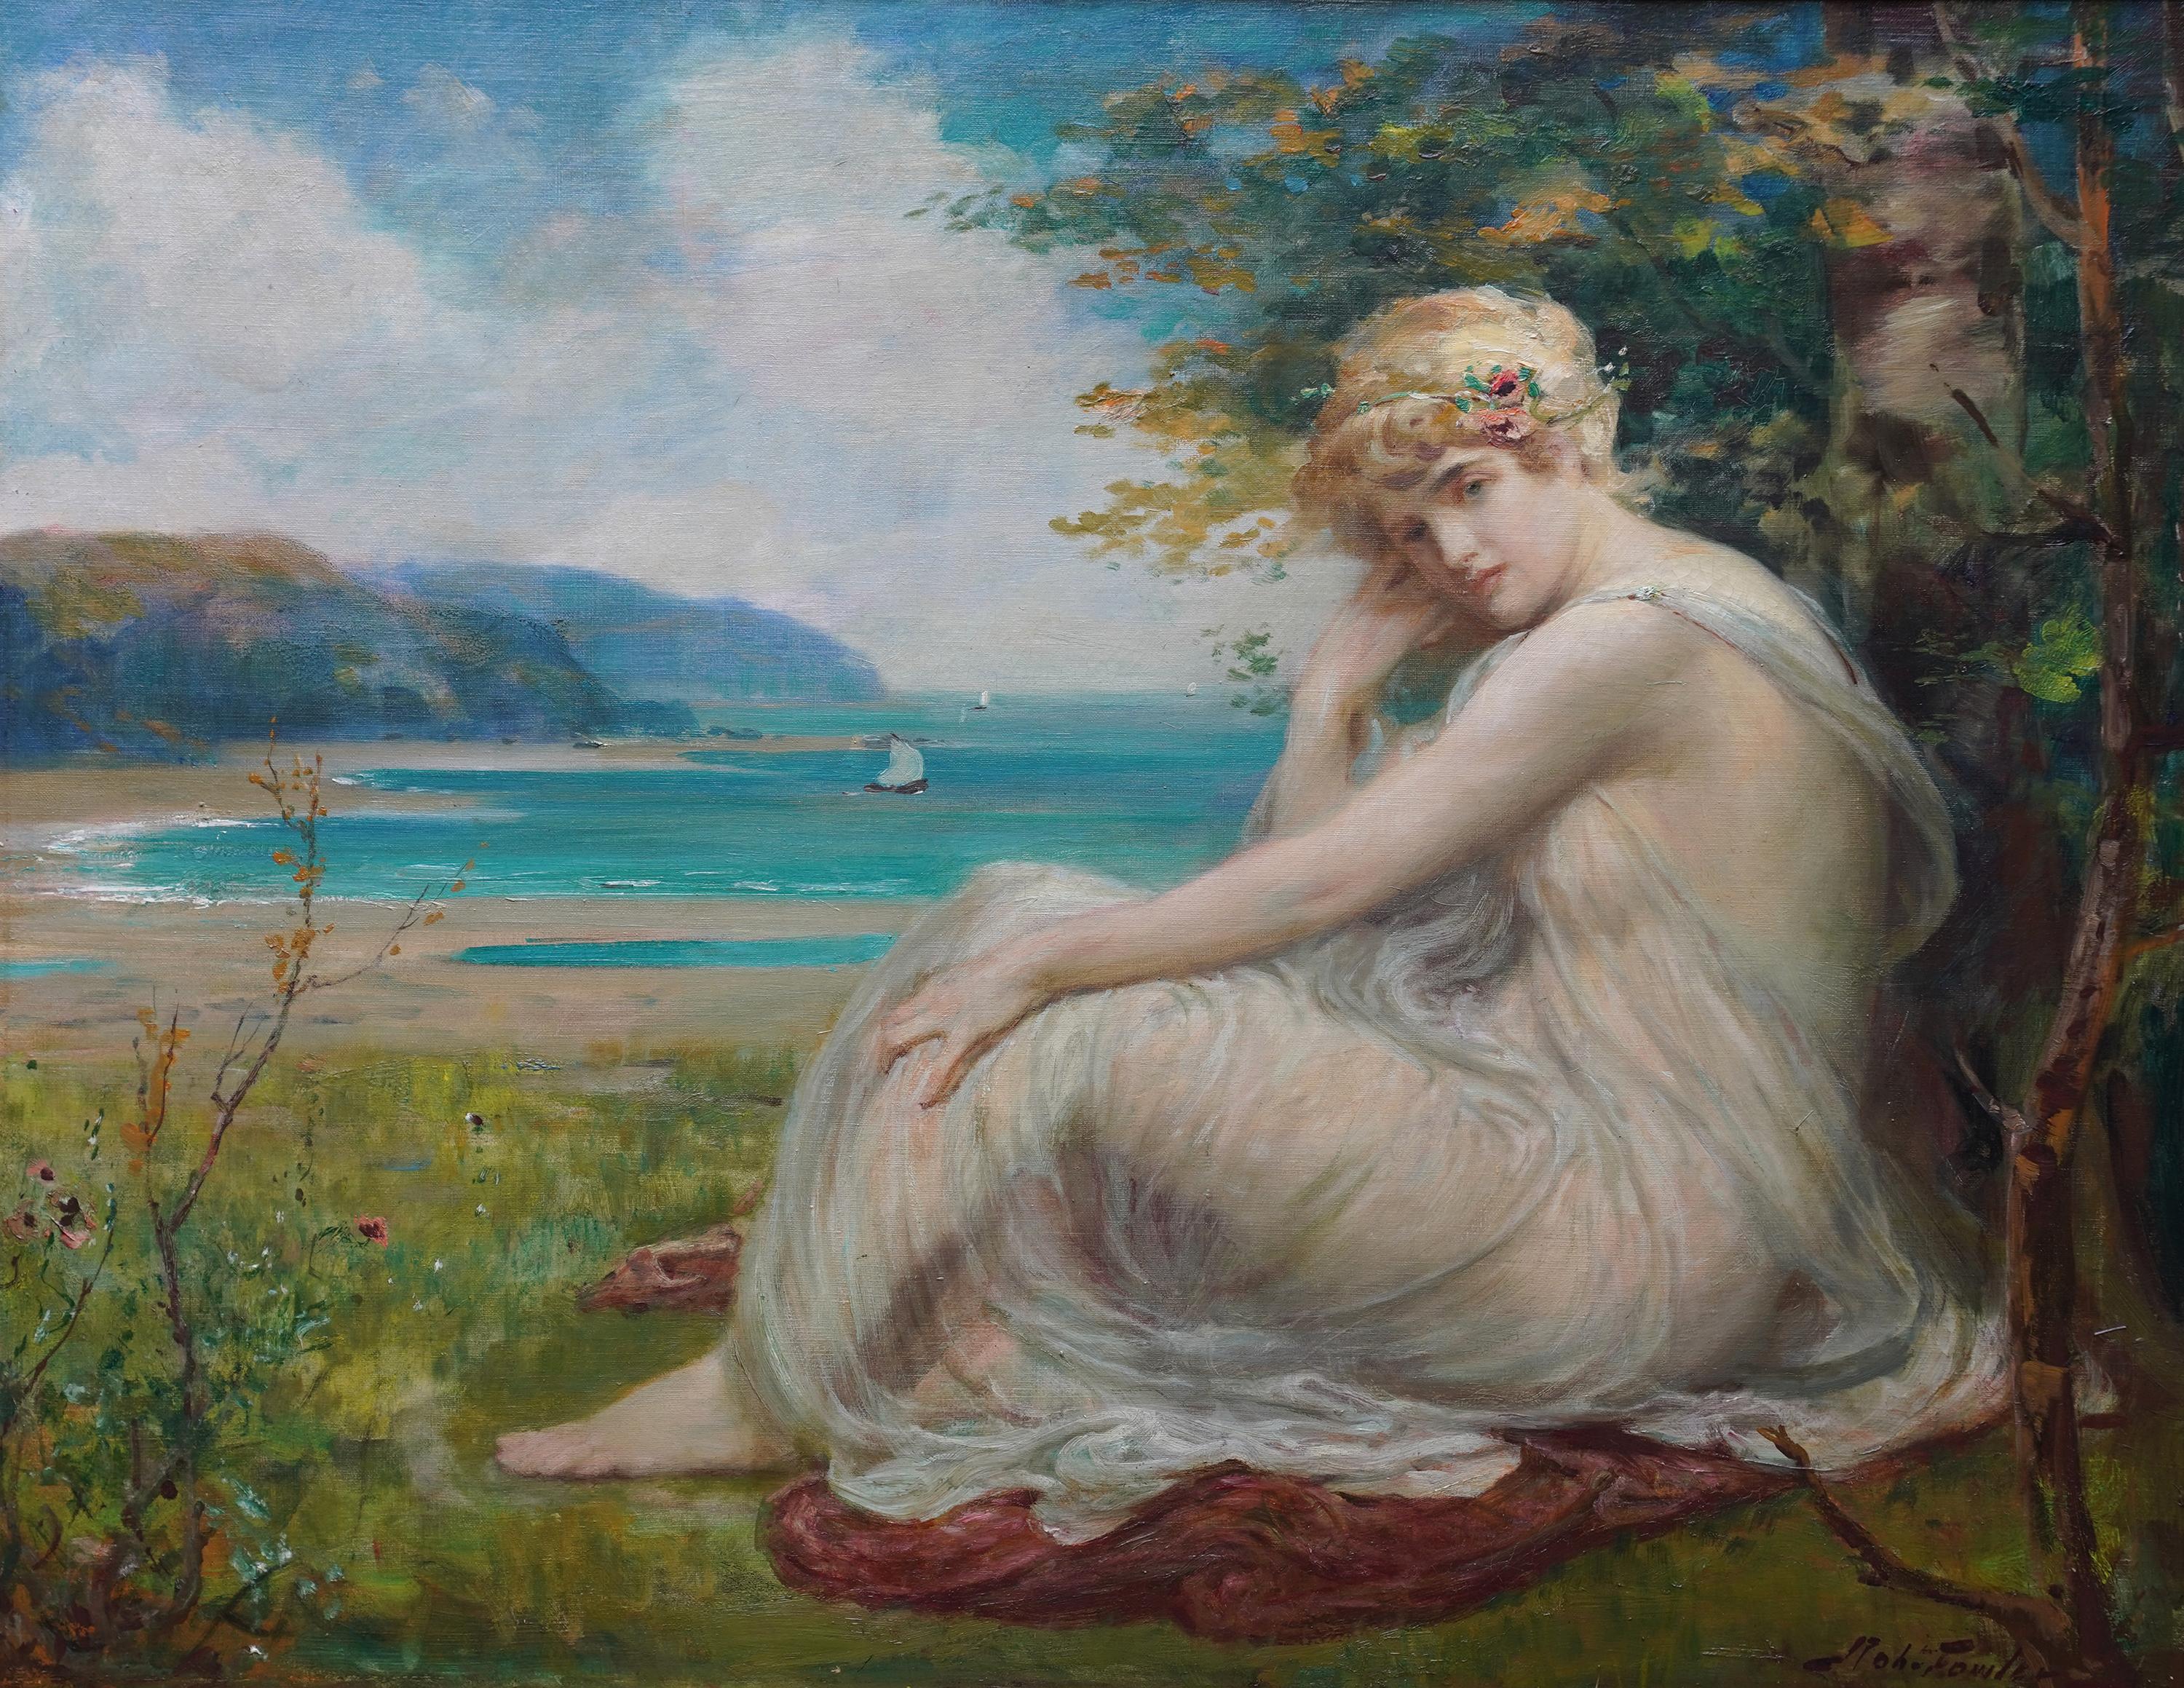 Portrait of Maiden in Coastal Landscape - Scottish Victorian art oil painting - Painting by Robert Fowler